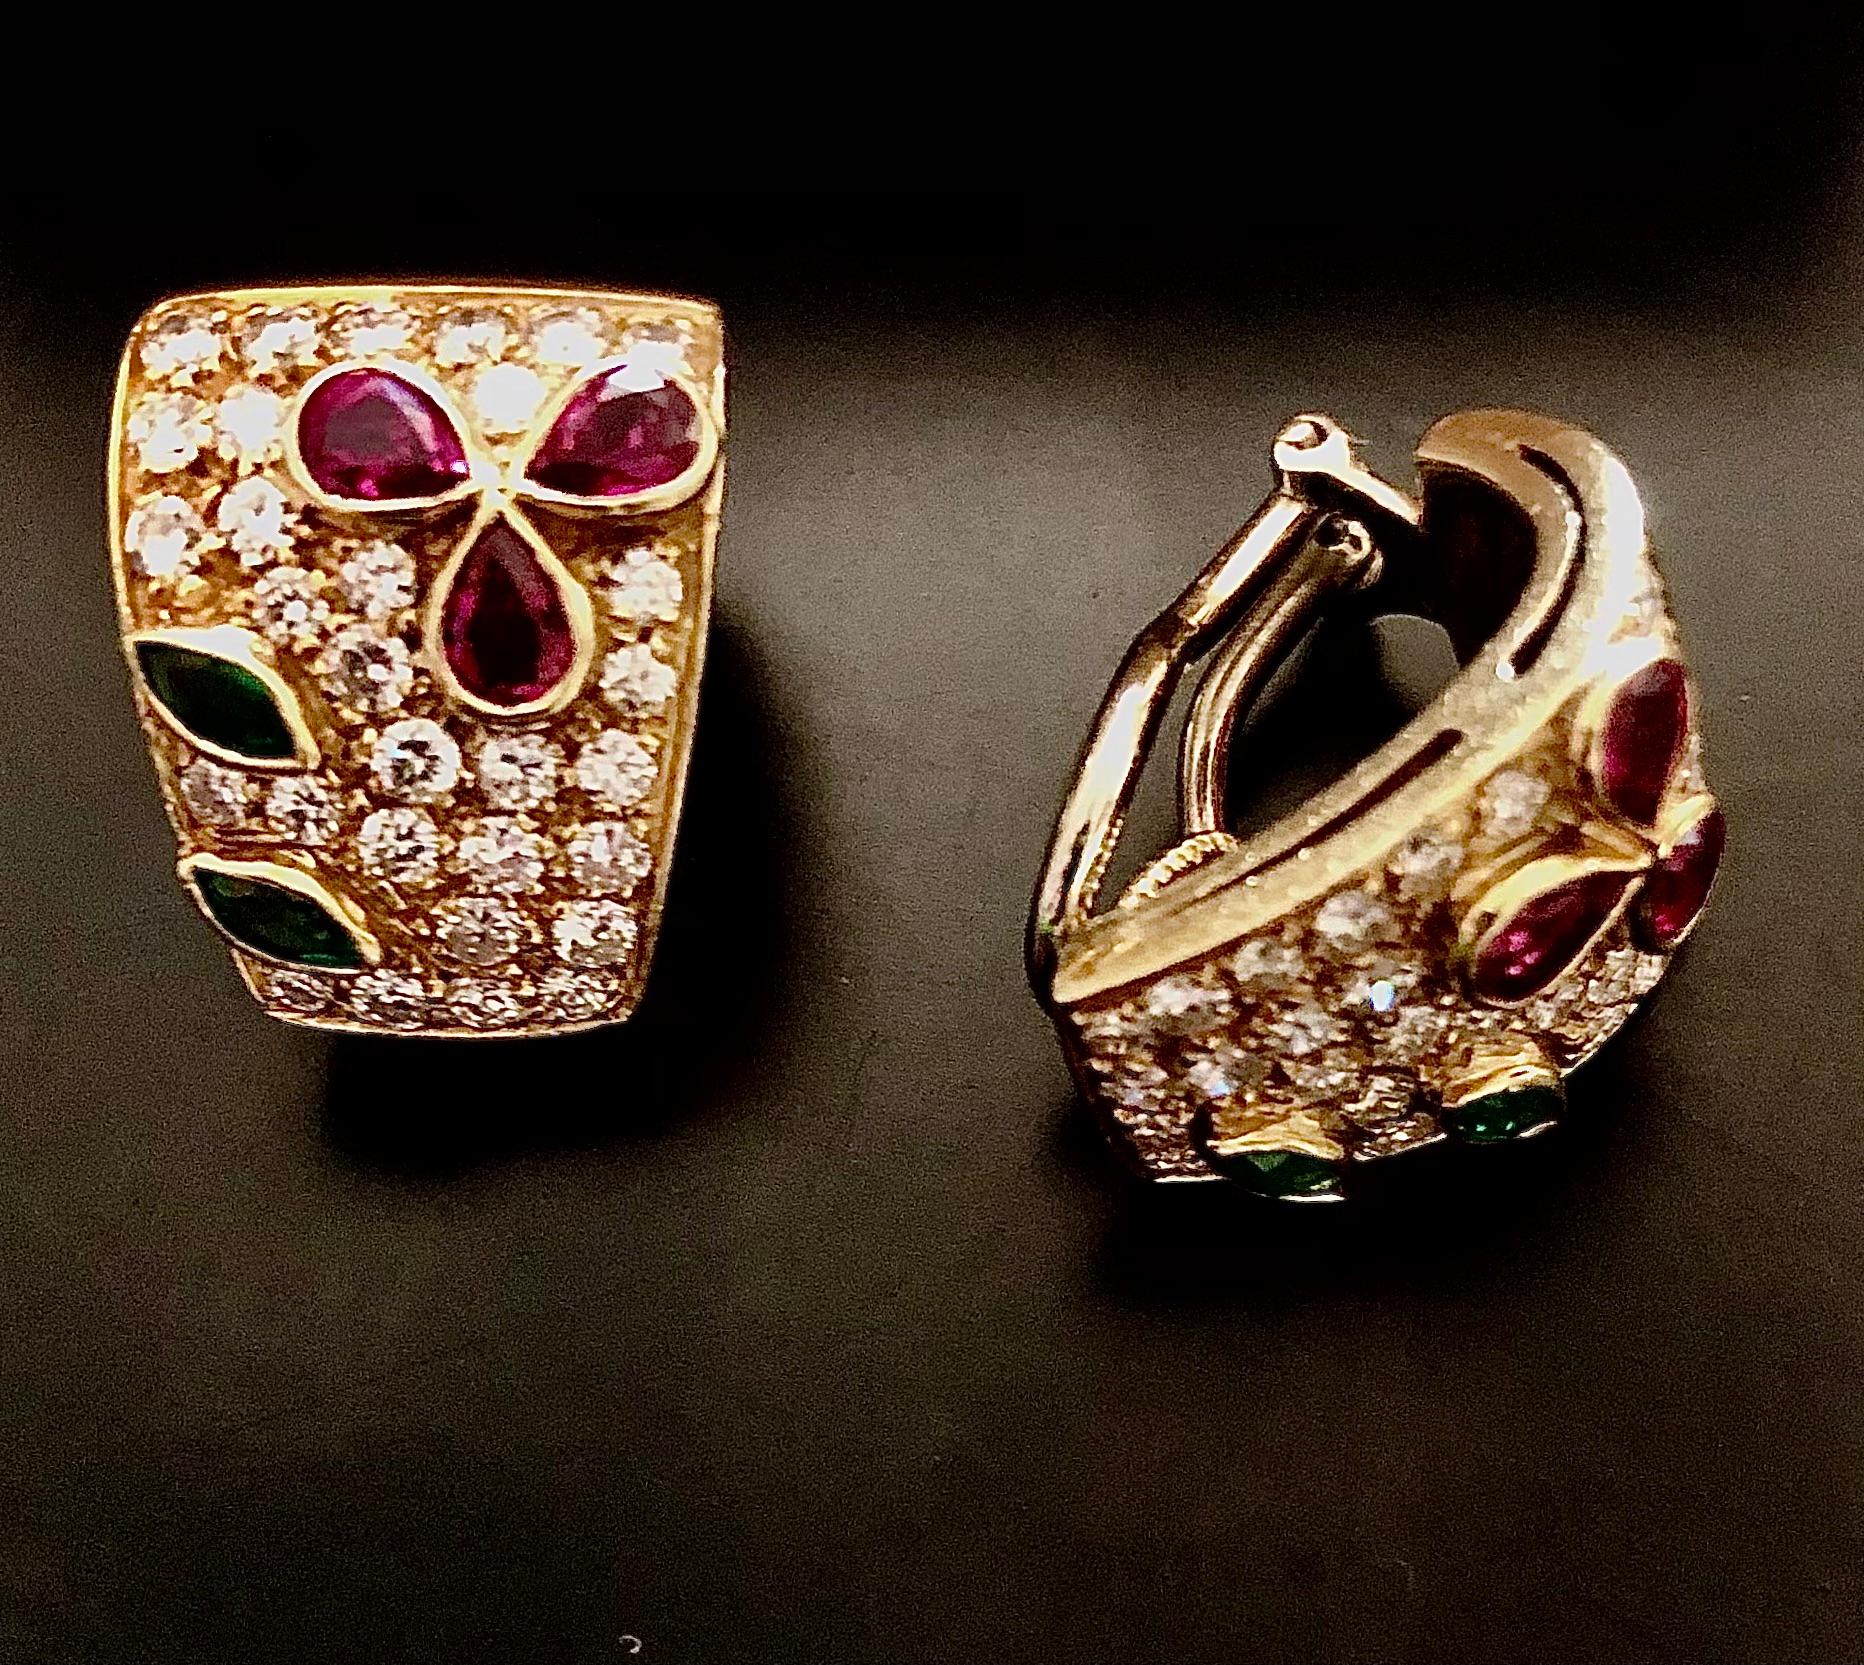 Pretty pair of 18K yellow gold, elegant multi gem ear clips. The surface paved with sparkling white diamonds inlaid with abstract flower decoration in beautifully colored emeralds, tourmaline and rubies. Clip closure to accommodate non pierced